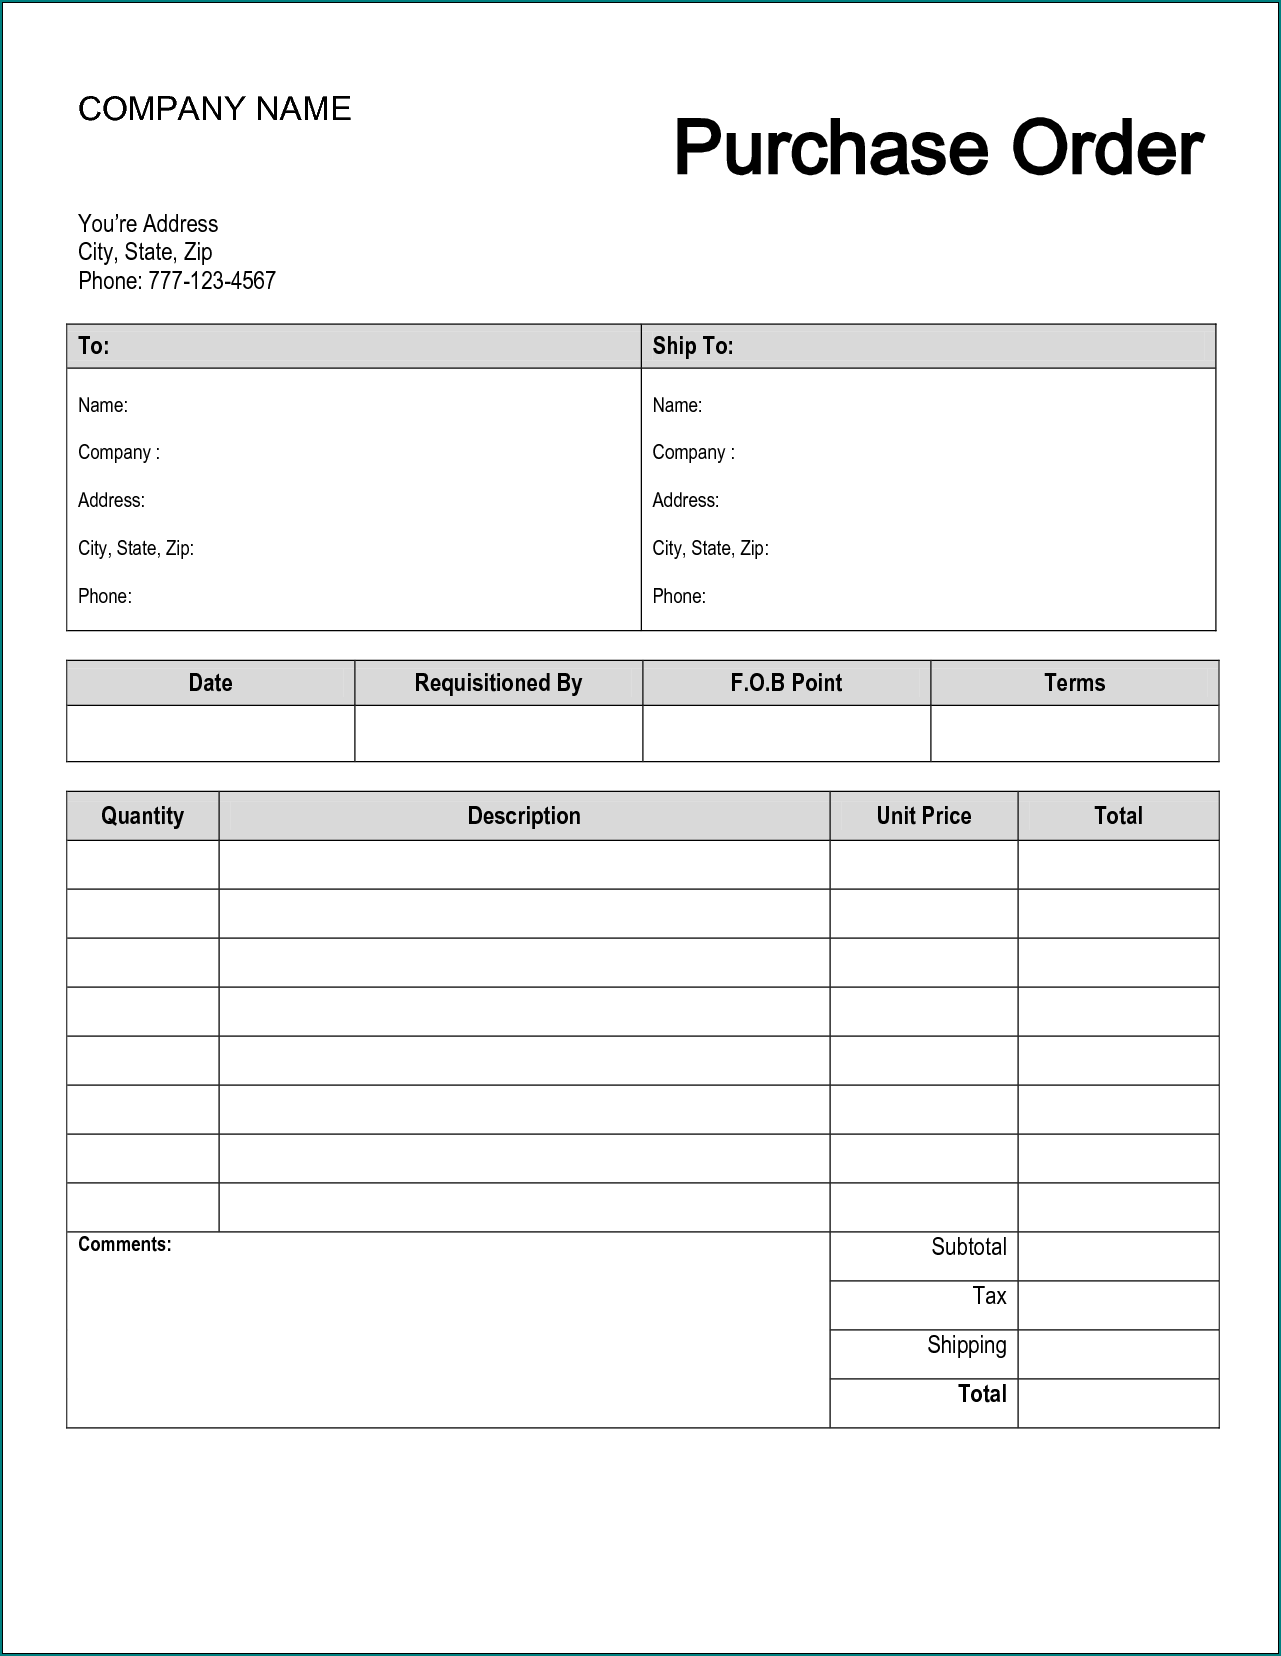 Example of Purchase Order Form